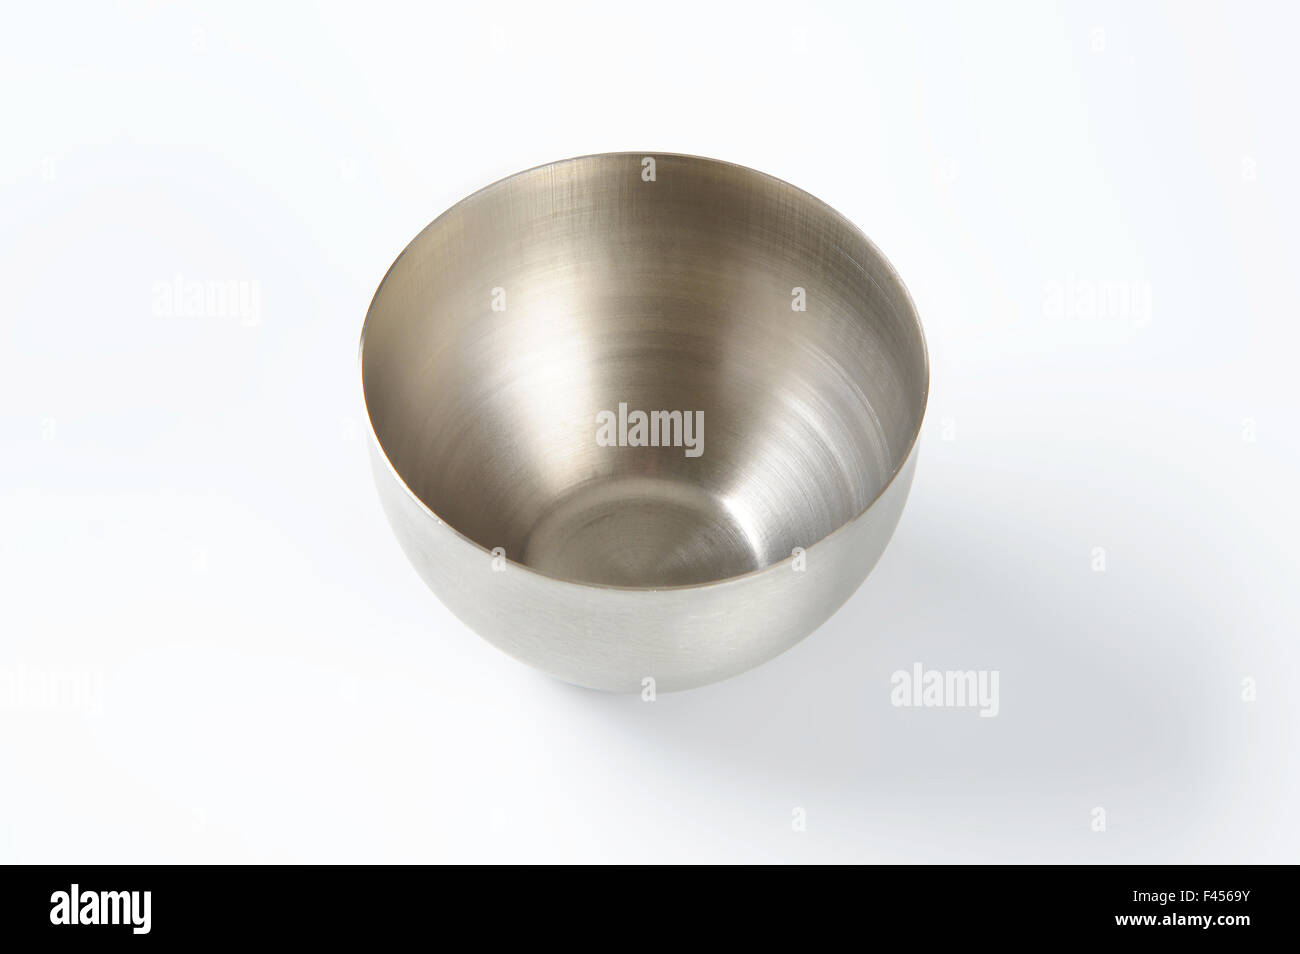 Deep Silver bowl on white background Banque D'Images